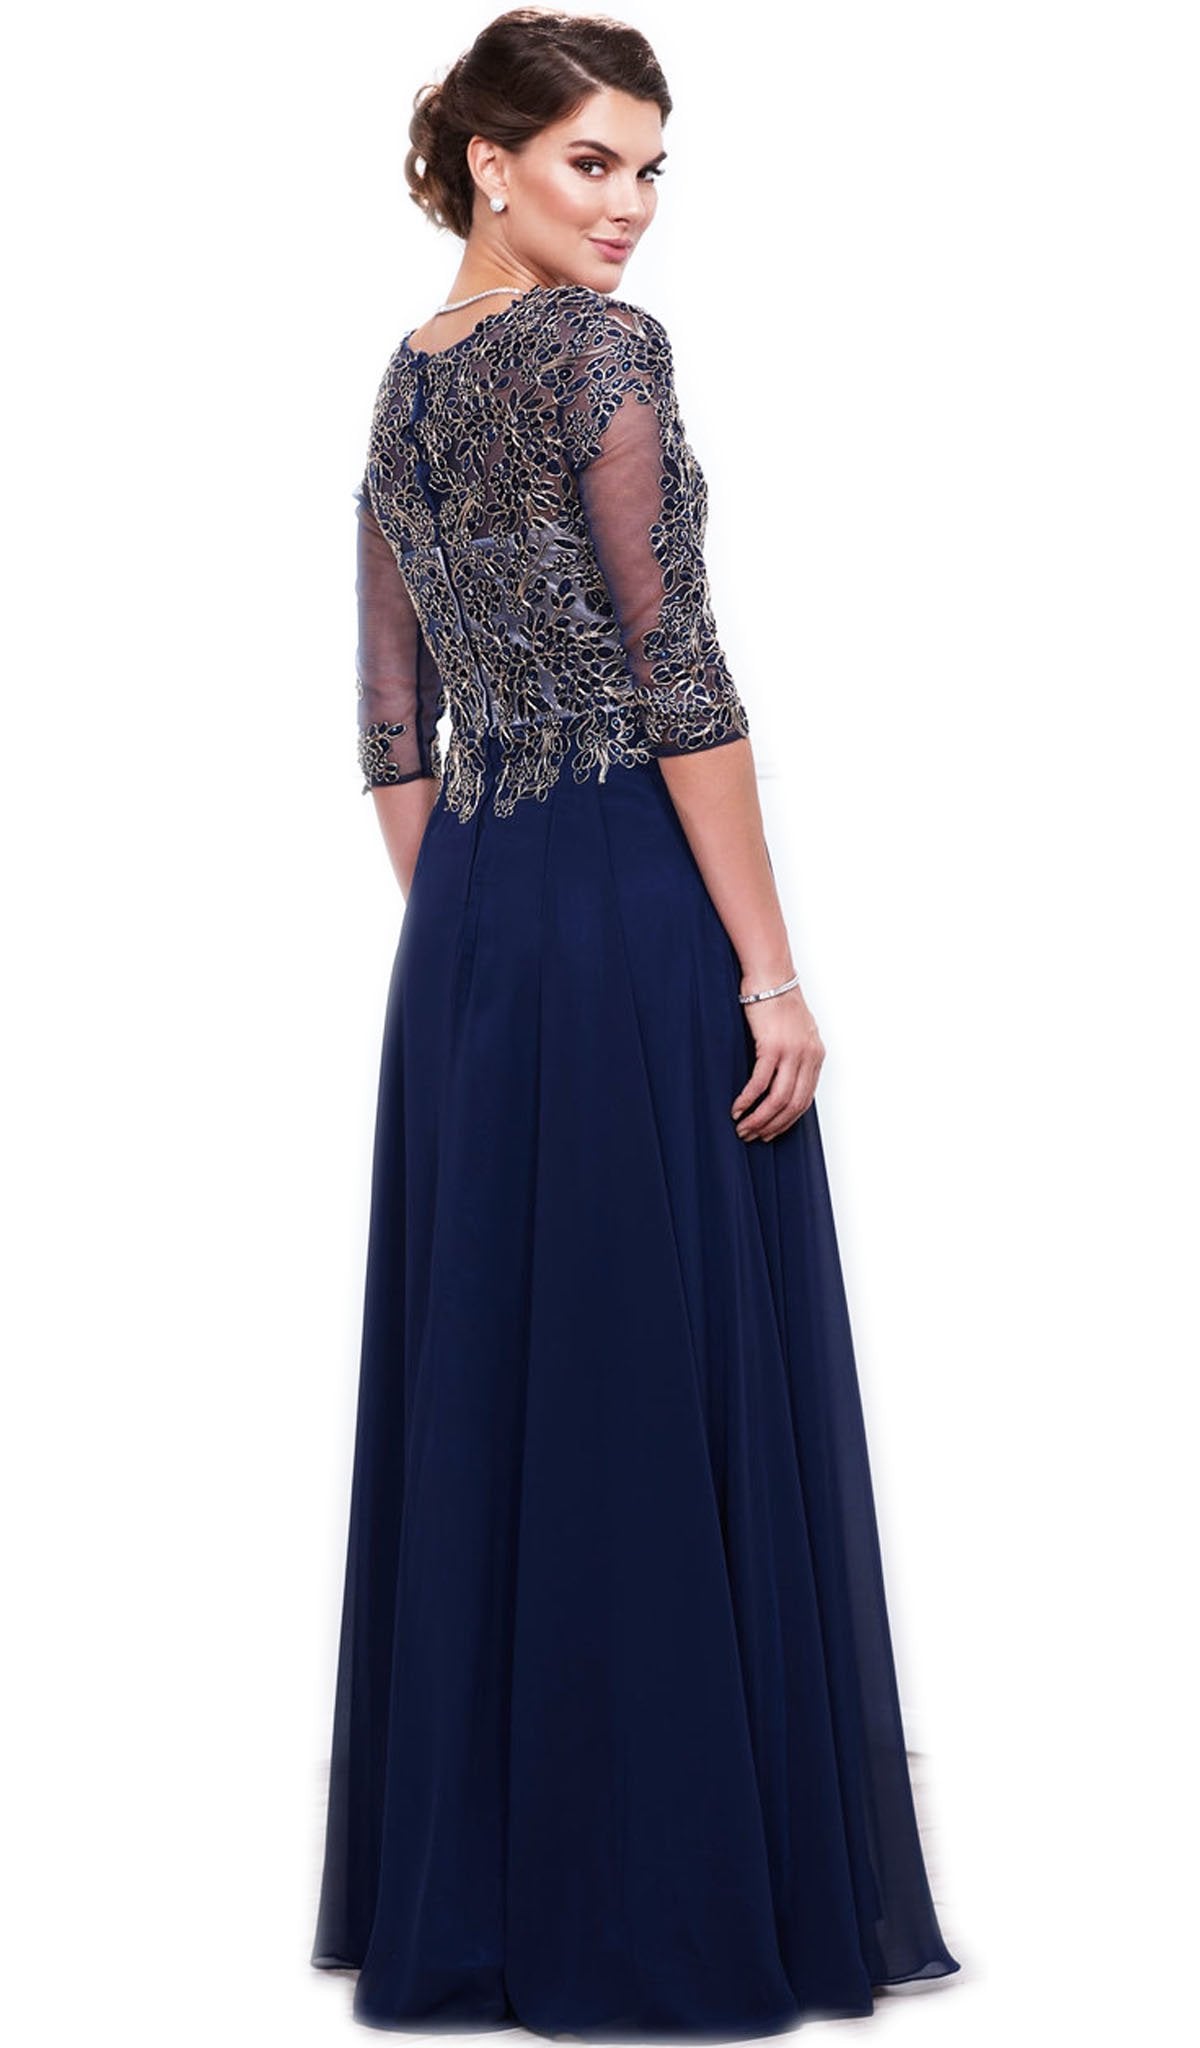 Nox Anabel - 5144 Embroidered A-Line Dress Special Occasion Dress